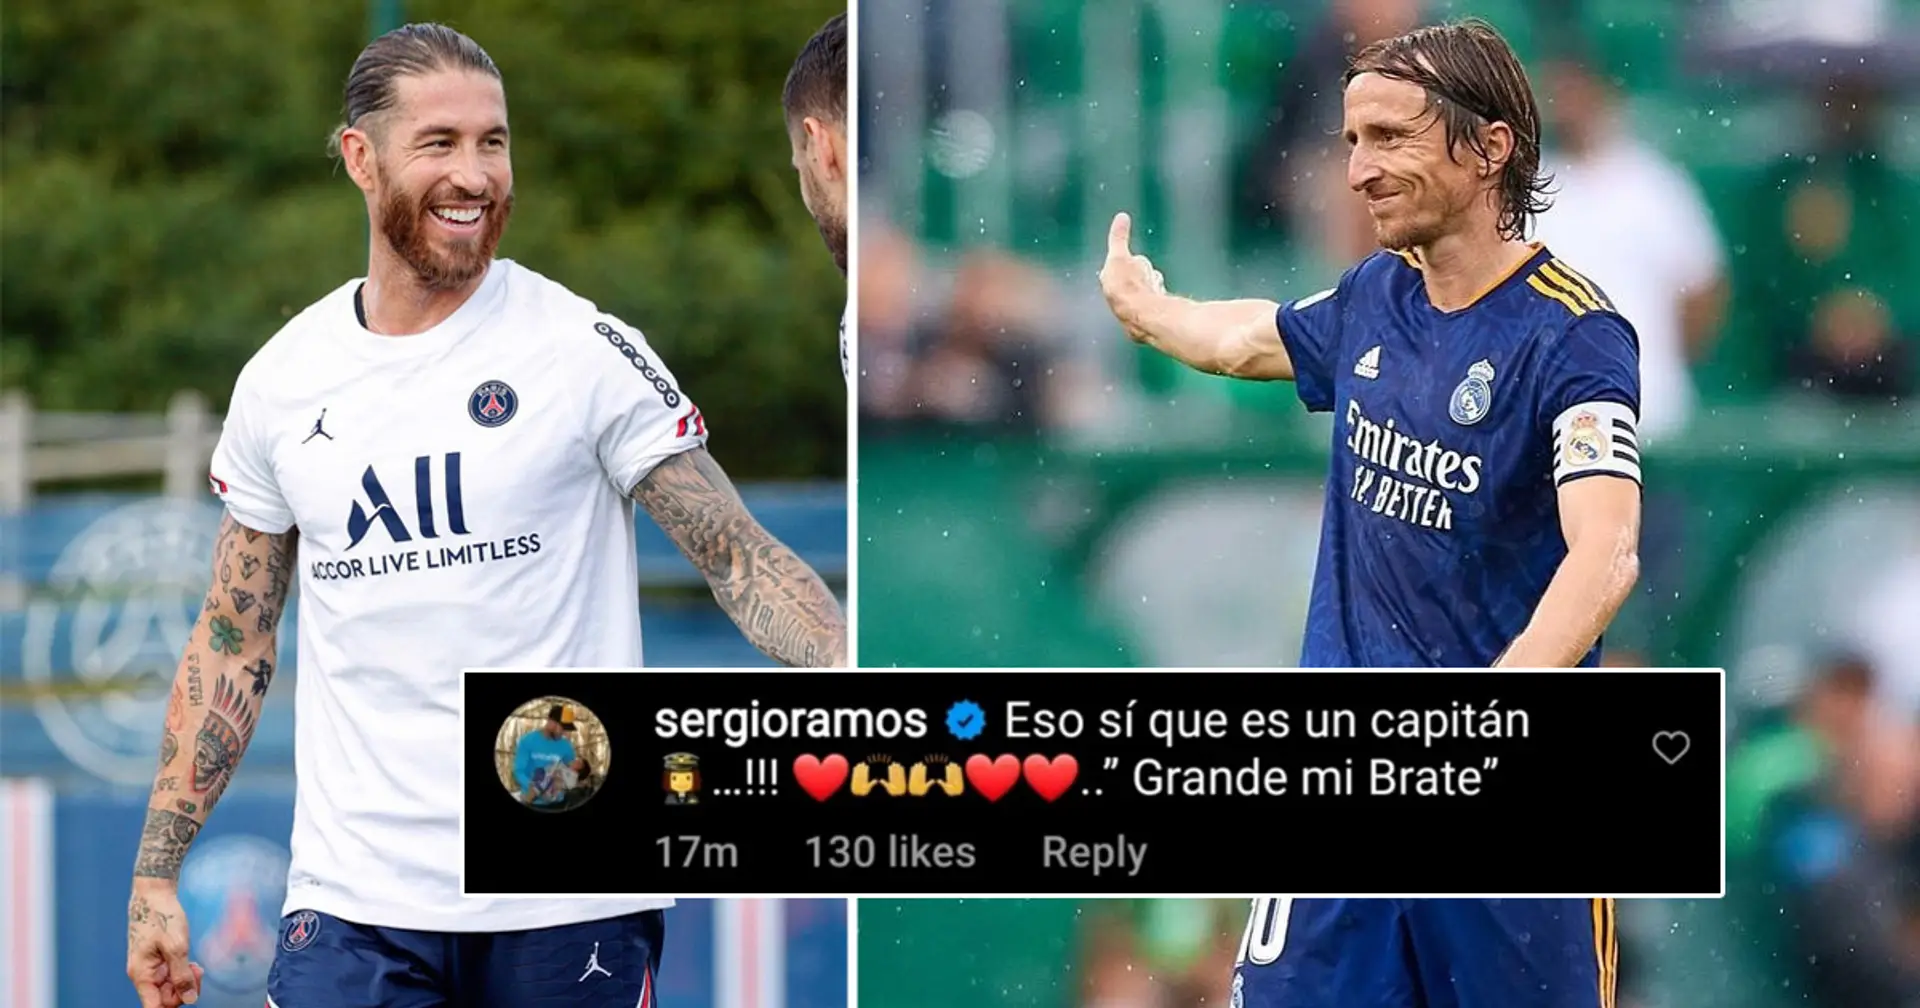 Ramos sends heartwarming message as Modric captains Madrid for first time